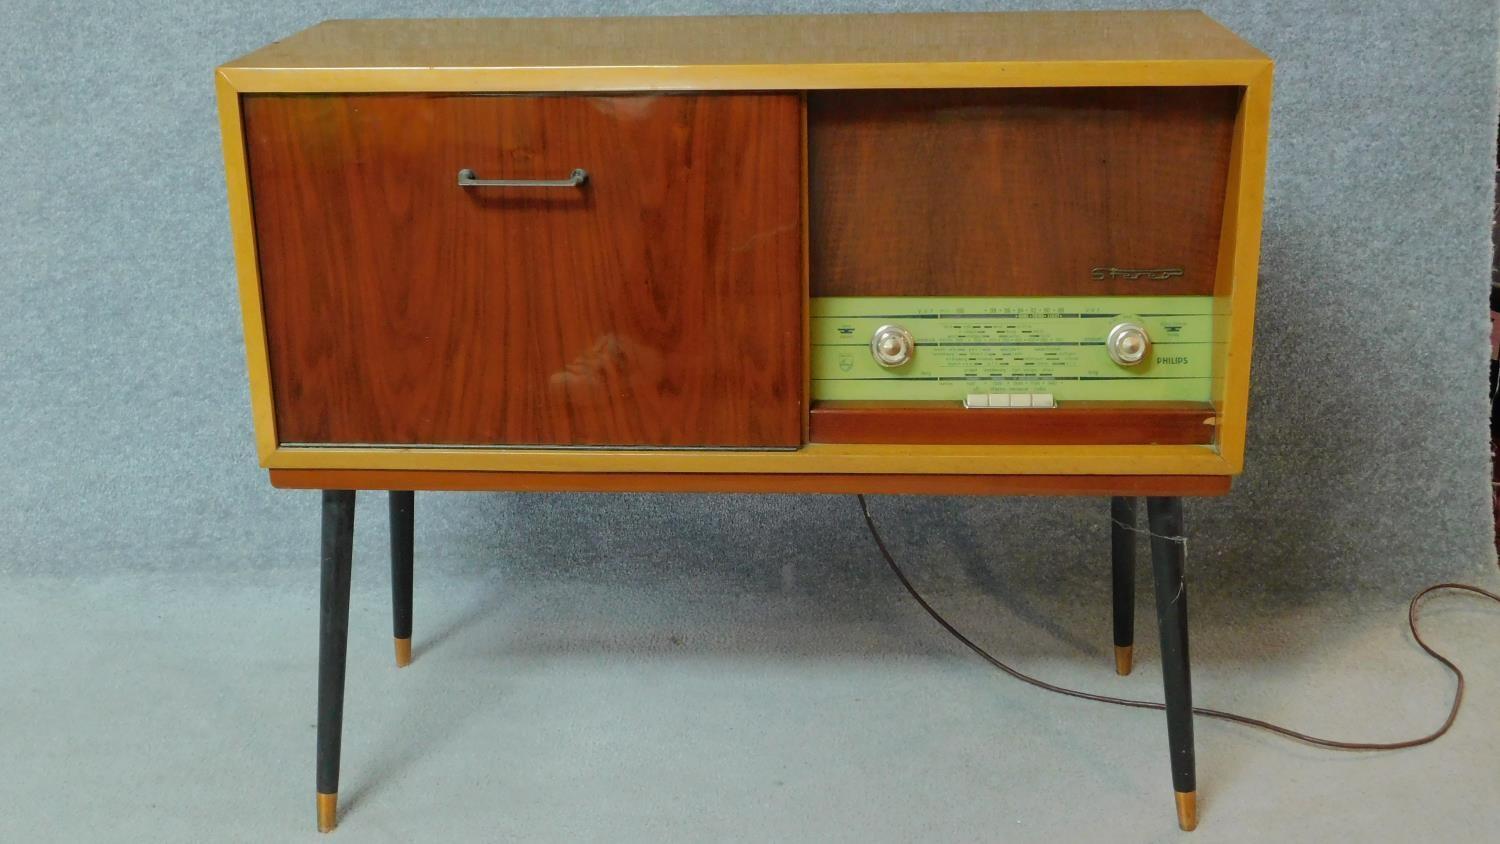 A 1960's vintage satin walnut and teak dancette supports radiogram, by Philips. H.76 W.92 D.36